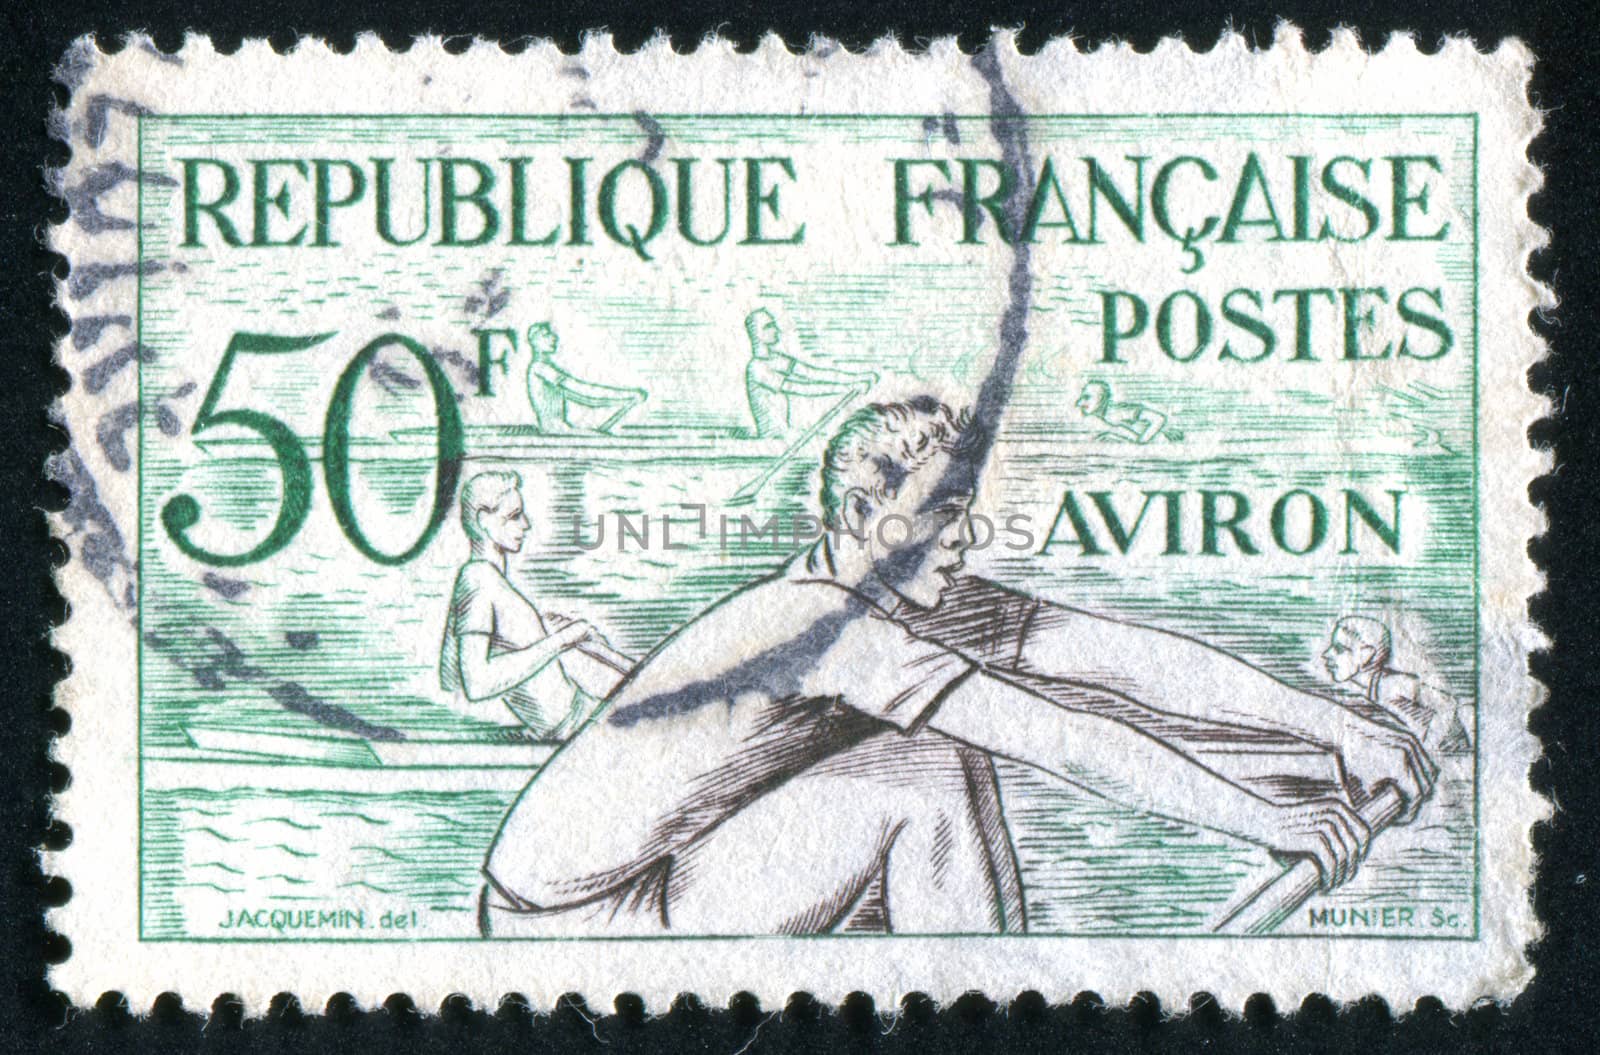 FRANCE - CIRCA 1953: stamp printed by France, shows Canoe racing, circa 1953